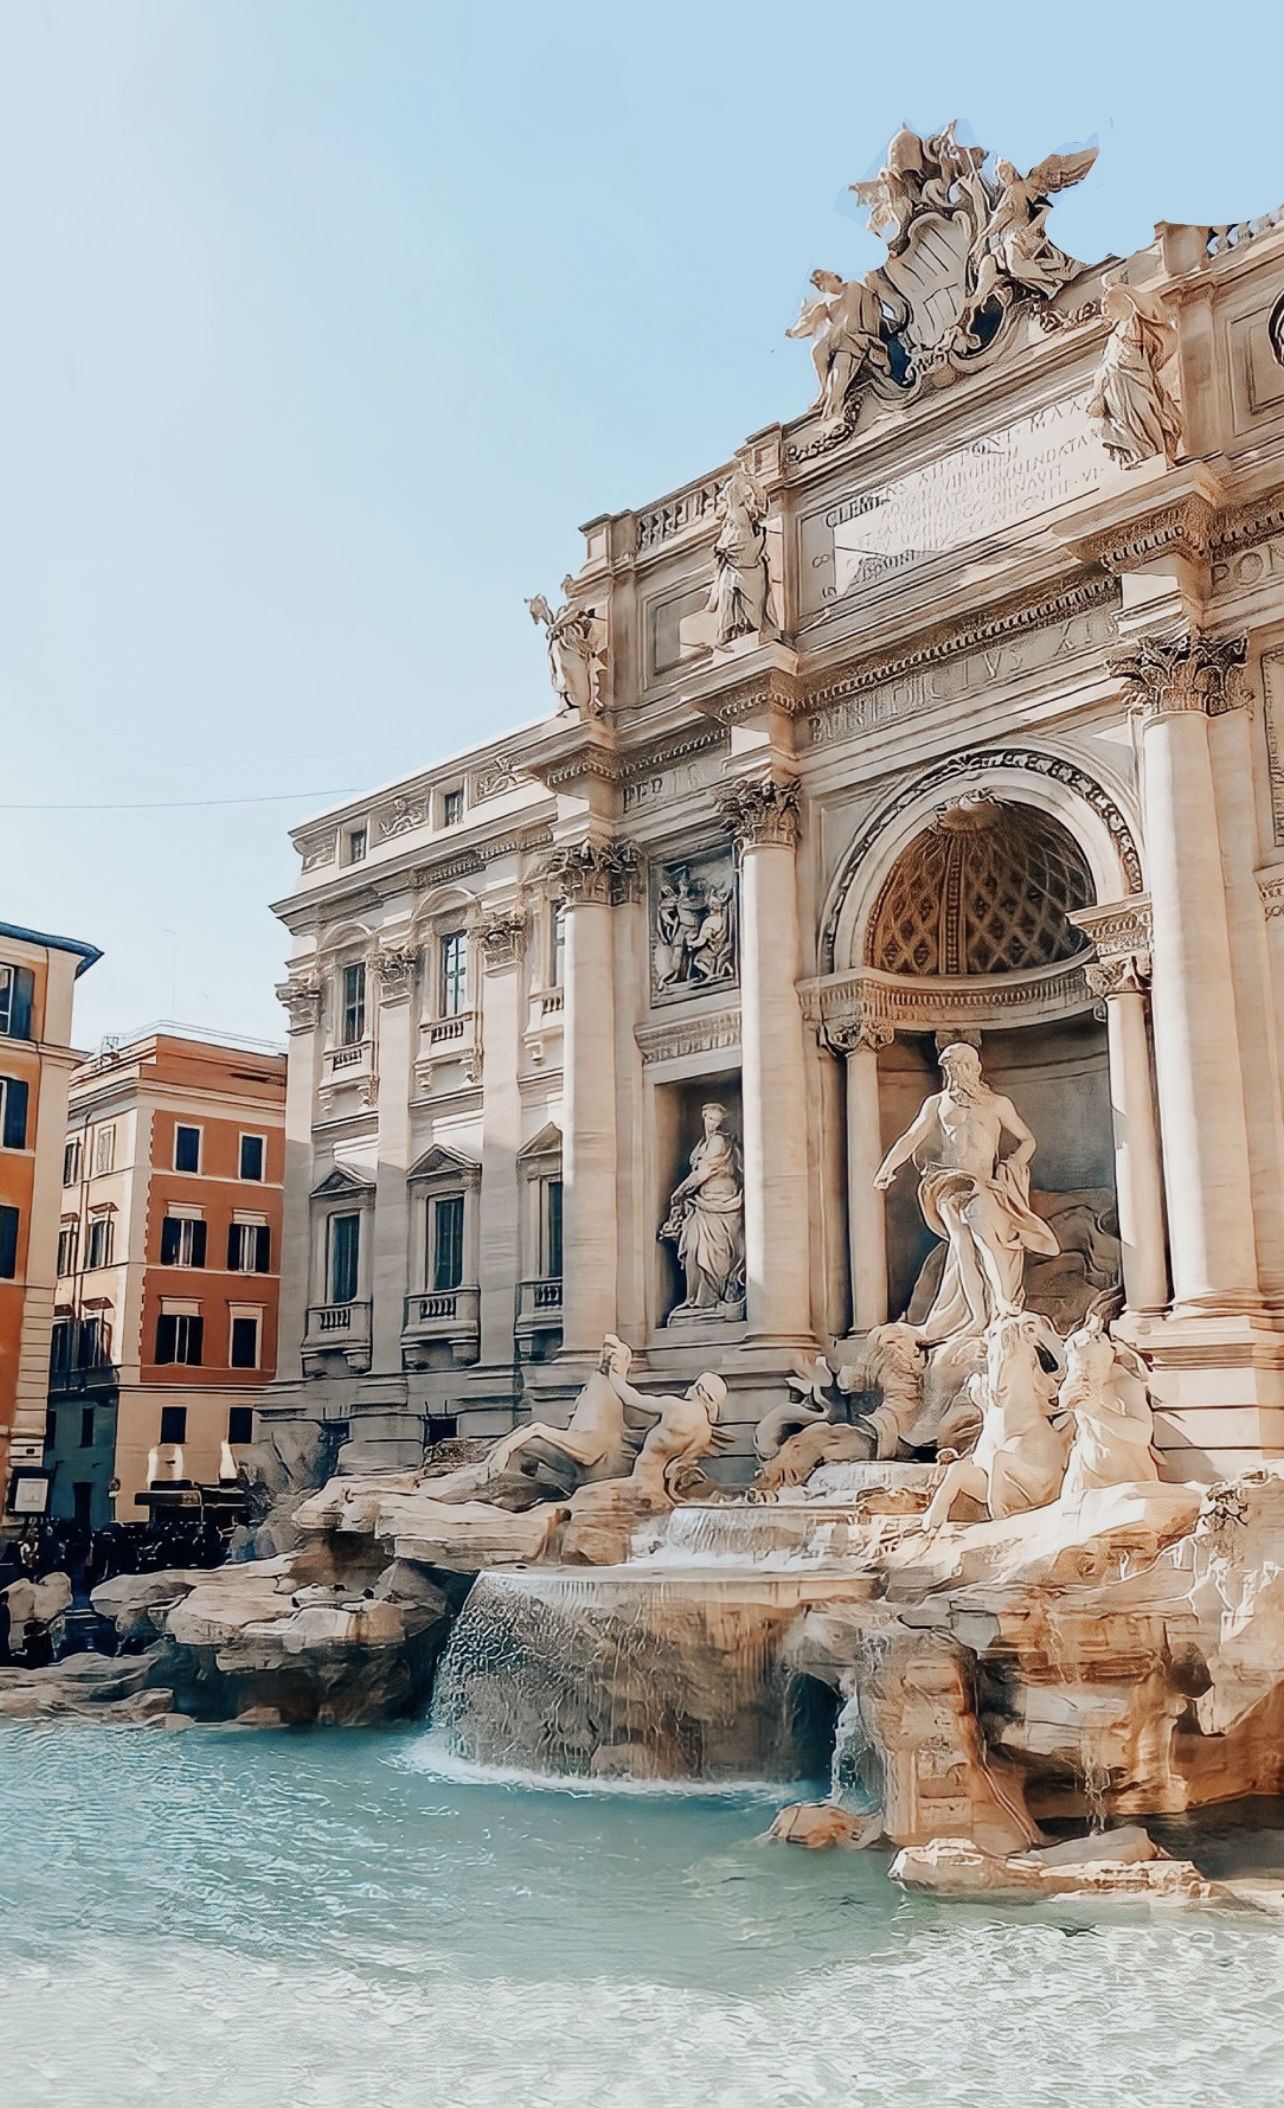 A shot of the Trevi Fountain in Rome, Italy.